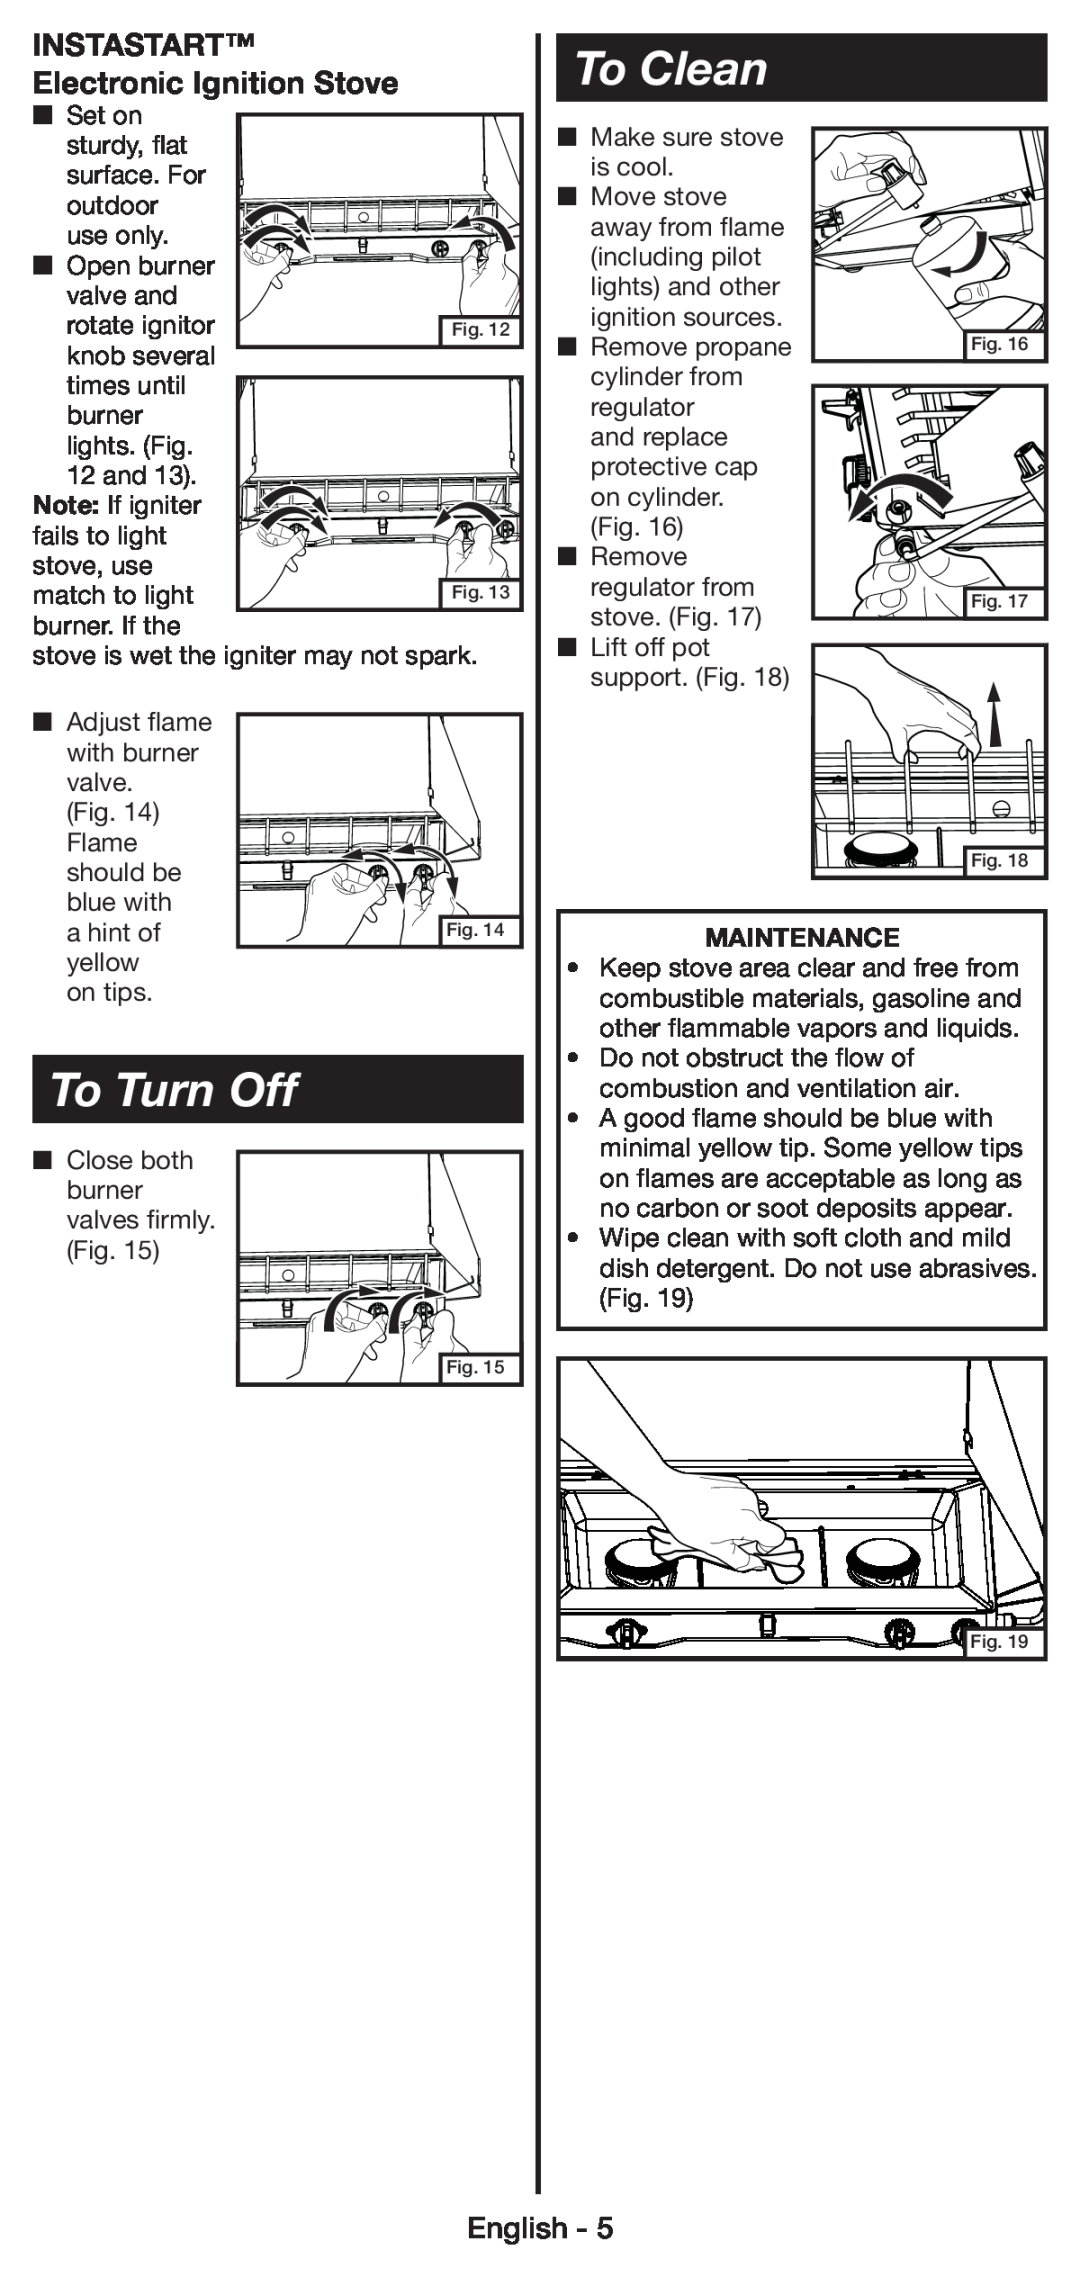 Coleman 5430E manual To Turn Off, To Clean, INSTASTART Electronic Ignition Stove, English, Maintenance 